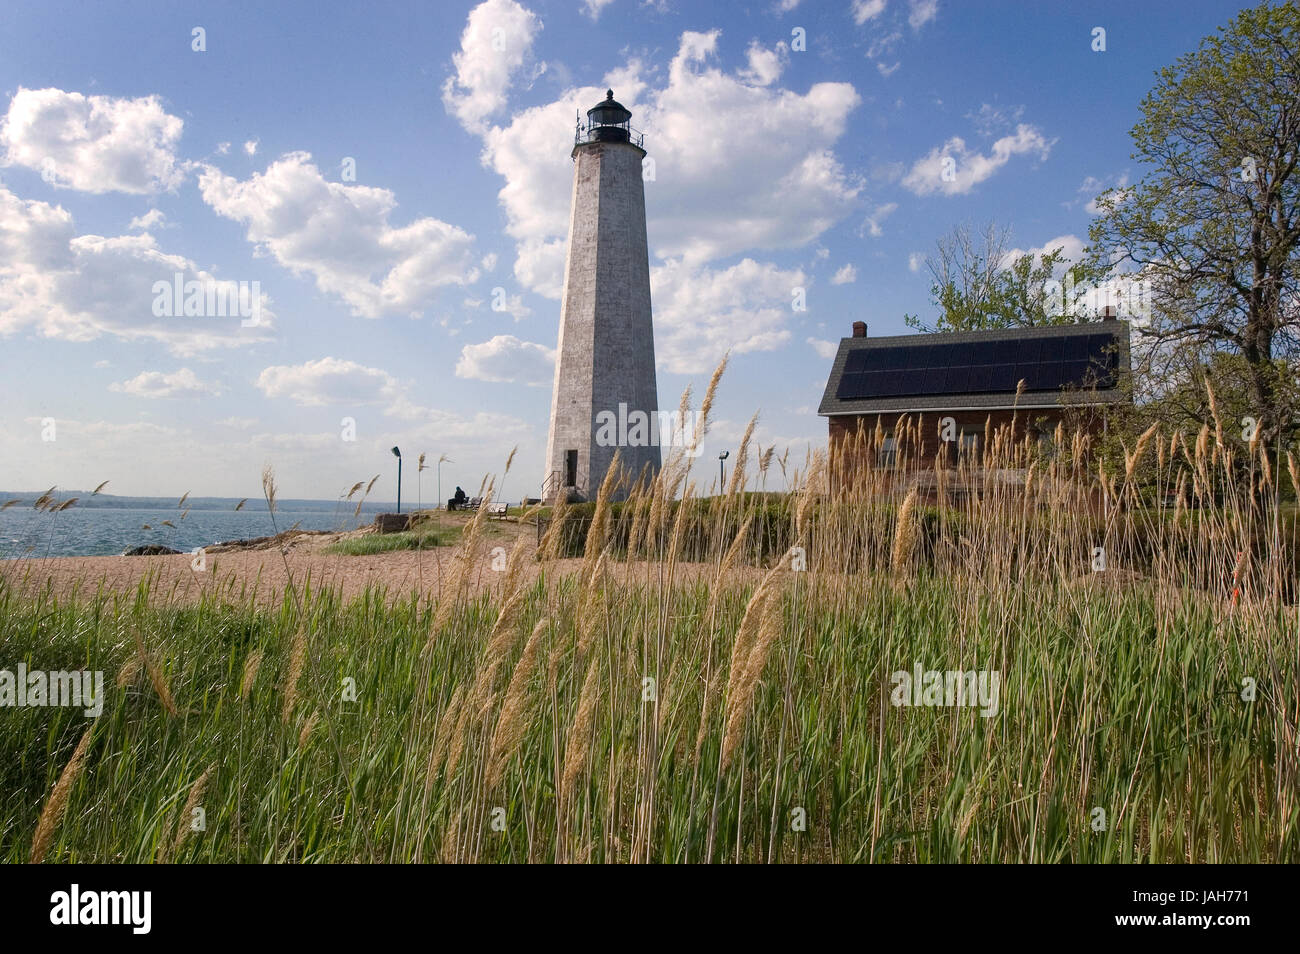 The lighthouse and Lighthouse Poiint Park - New Haven, Connecticut, US Stock Photo